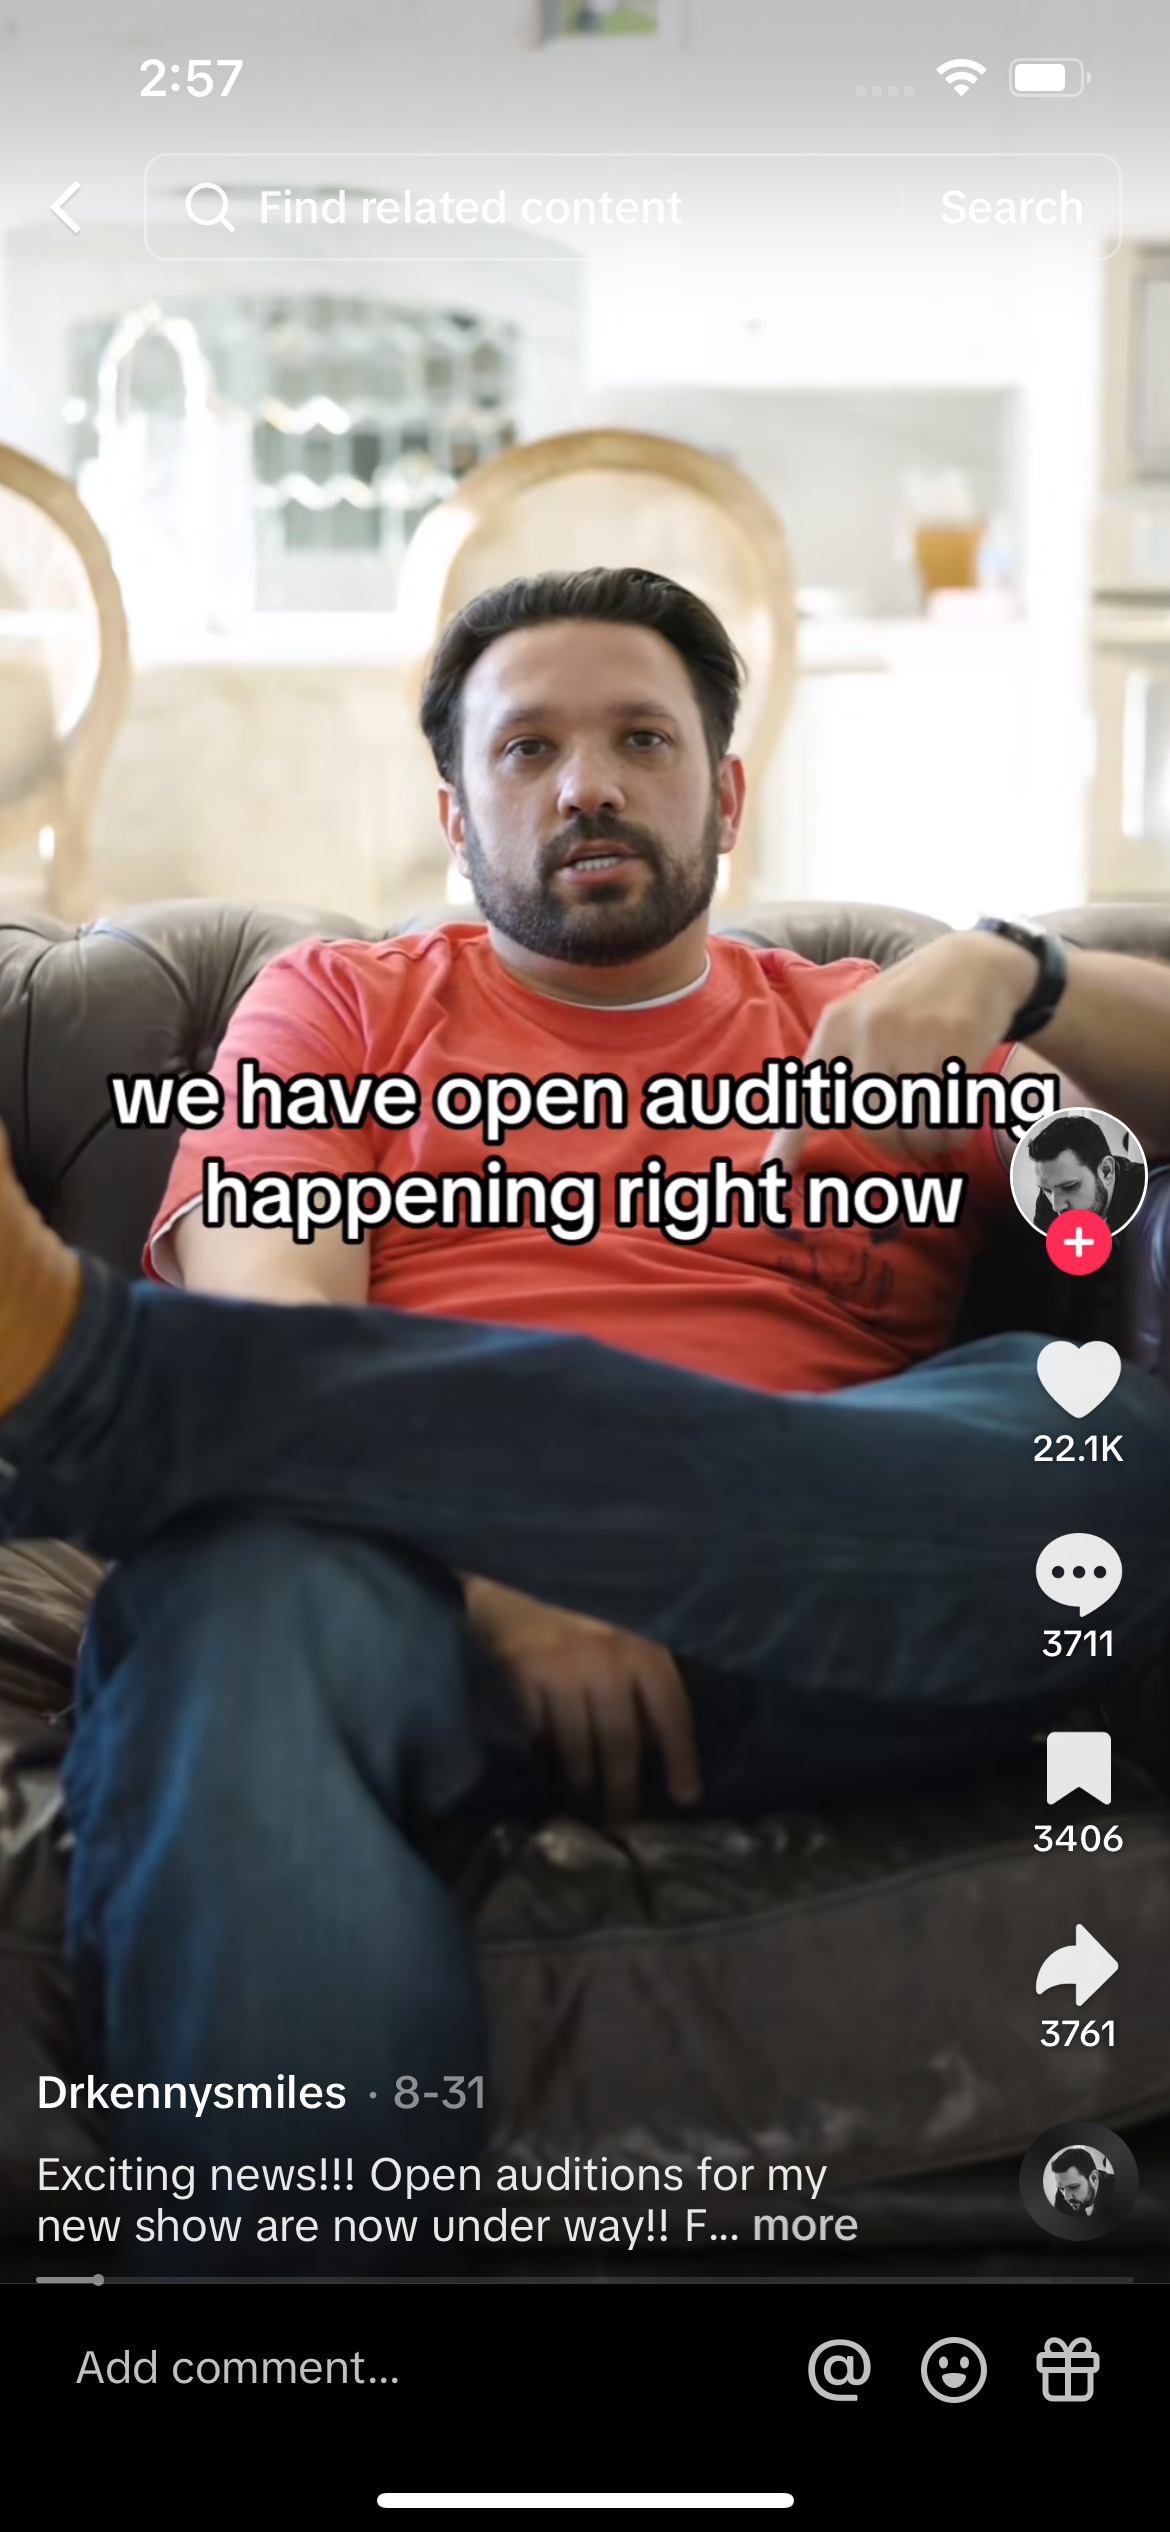 Dr Kenny advertising his new show on TikTok